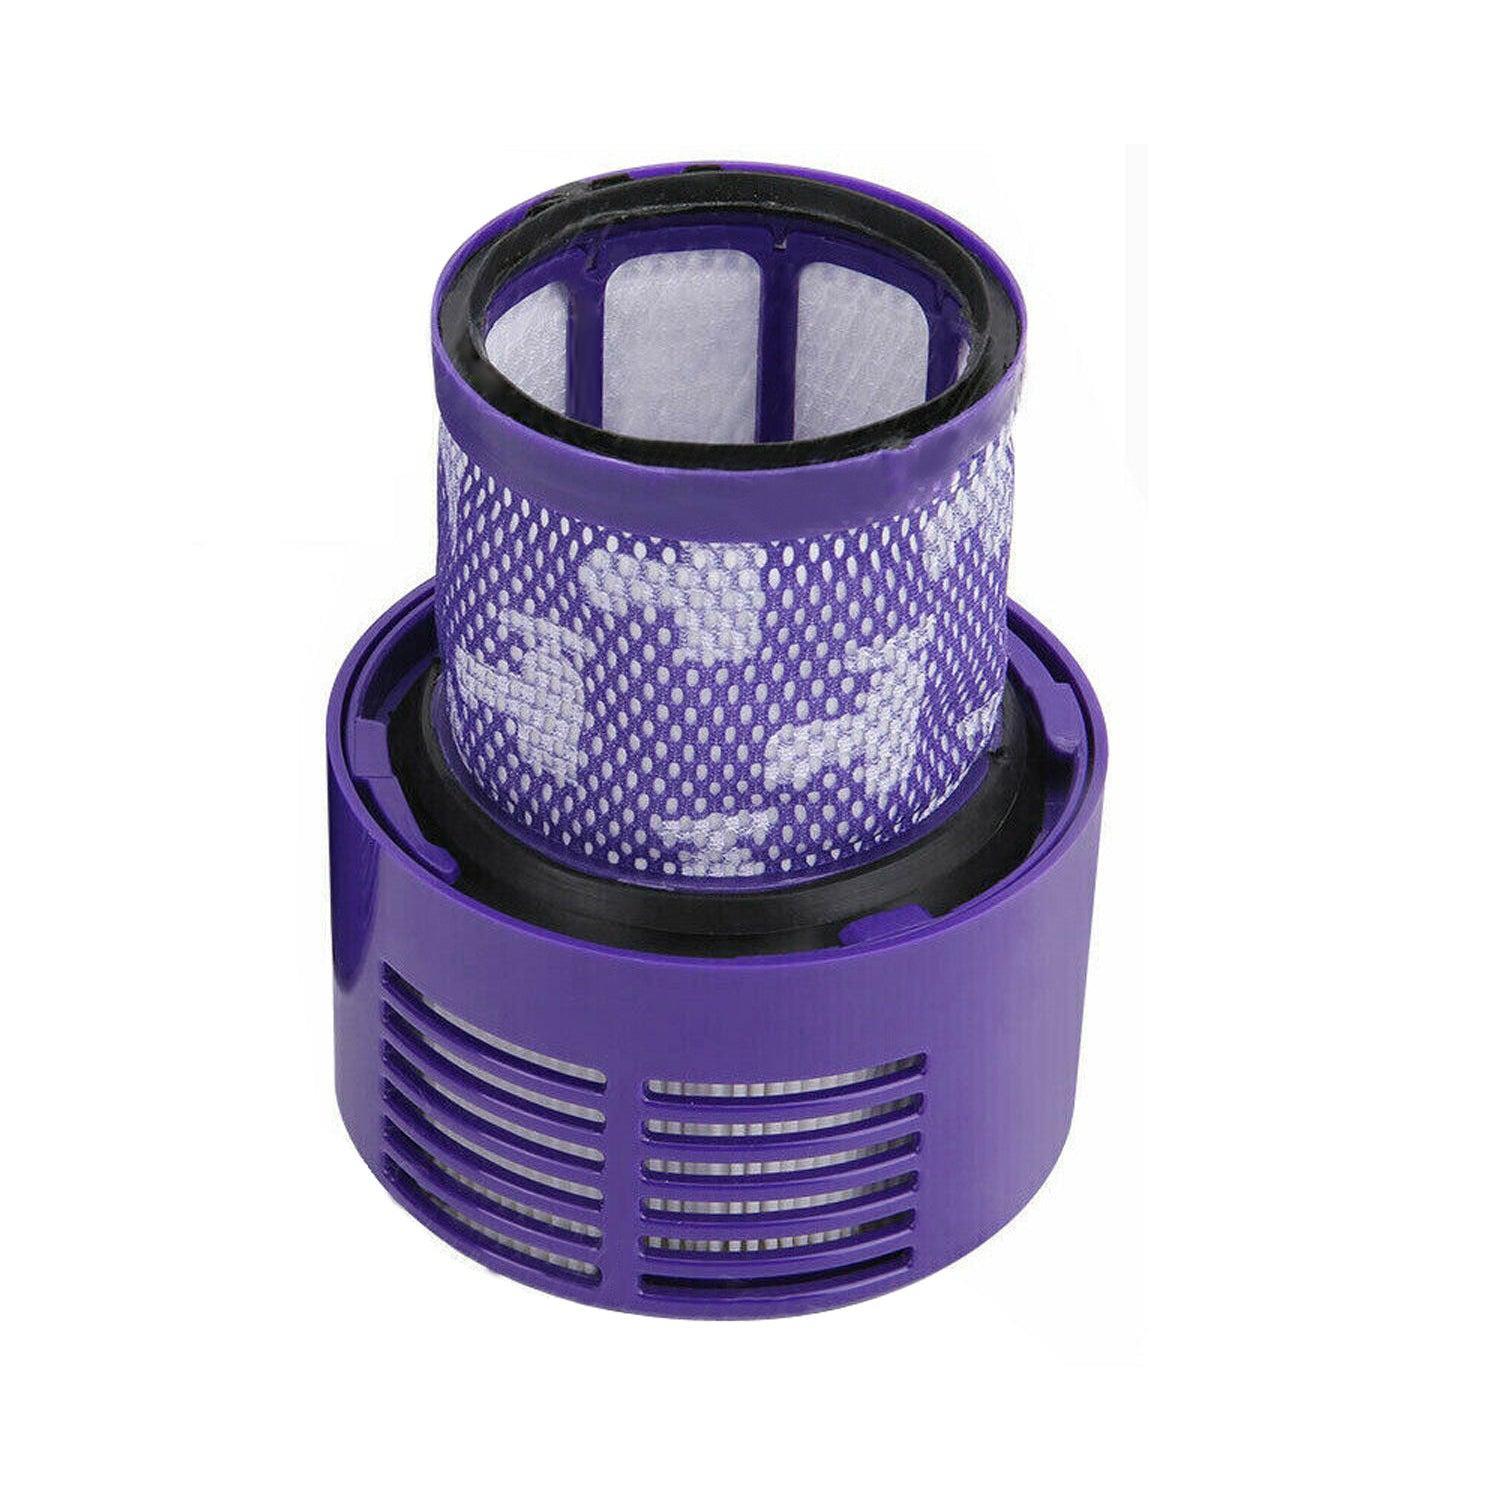 Vacuum Replacement Filter - For DYSON V10 SV12 Cyclone Animal